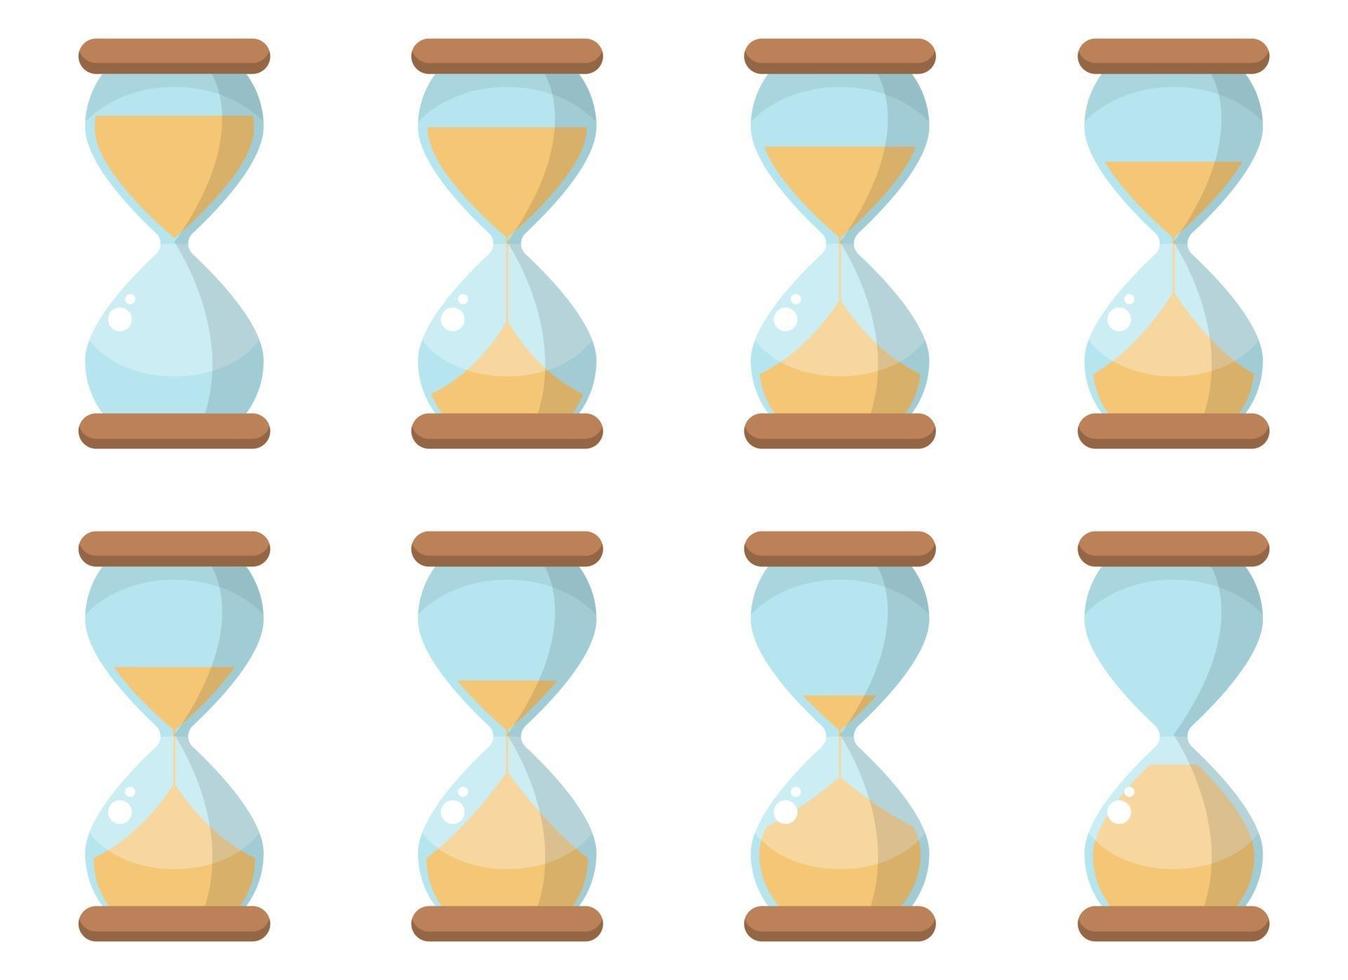 Hourglass icon vector design illustration set isolated on white background